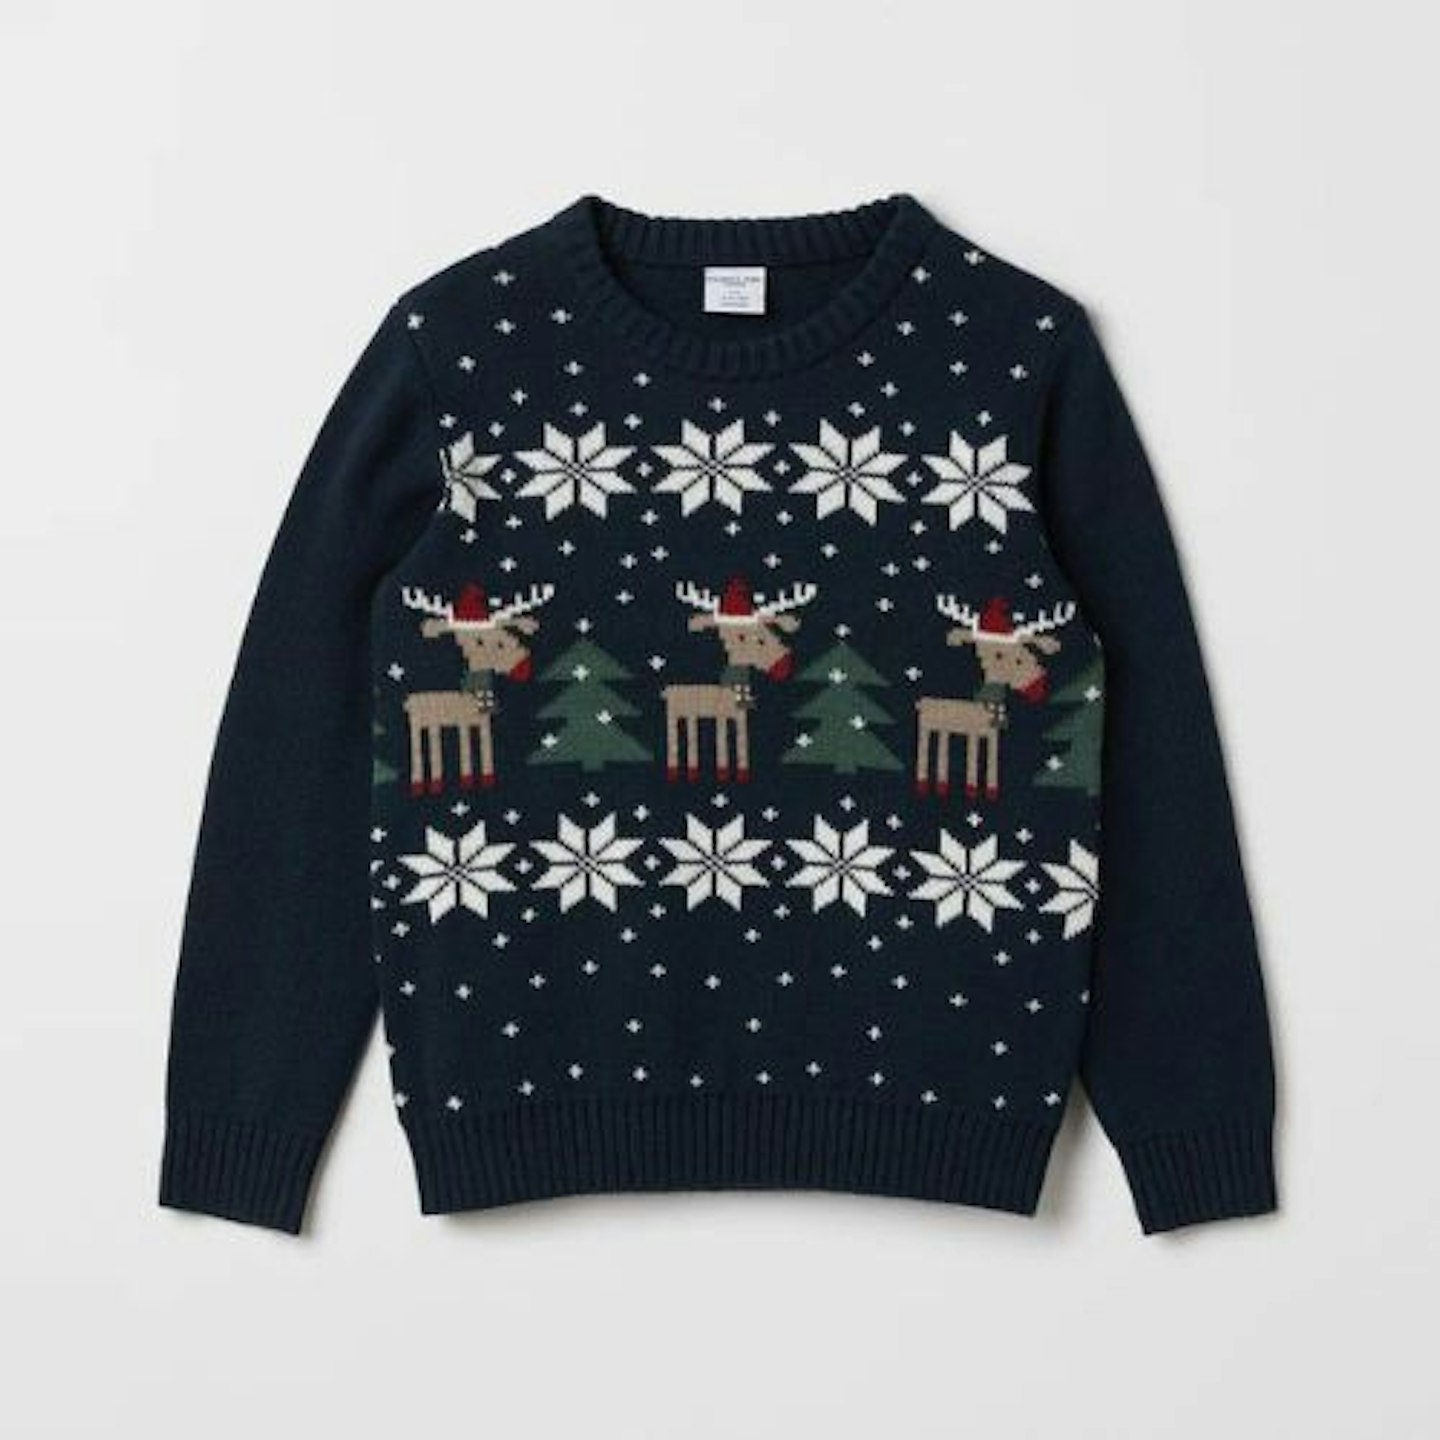 Best Christmas outfit Kids Christmas Jumper